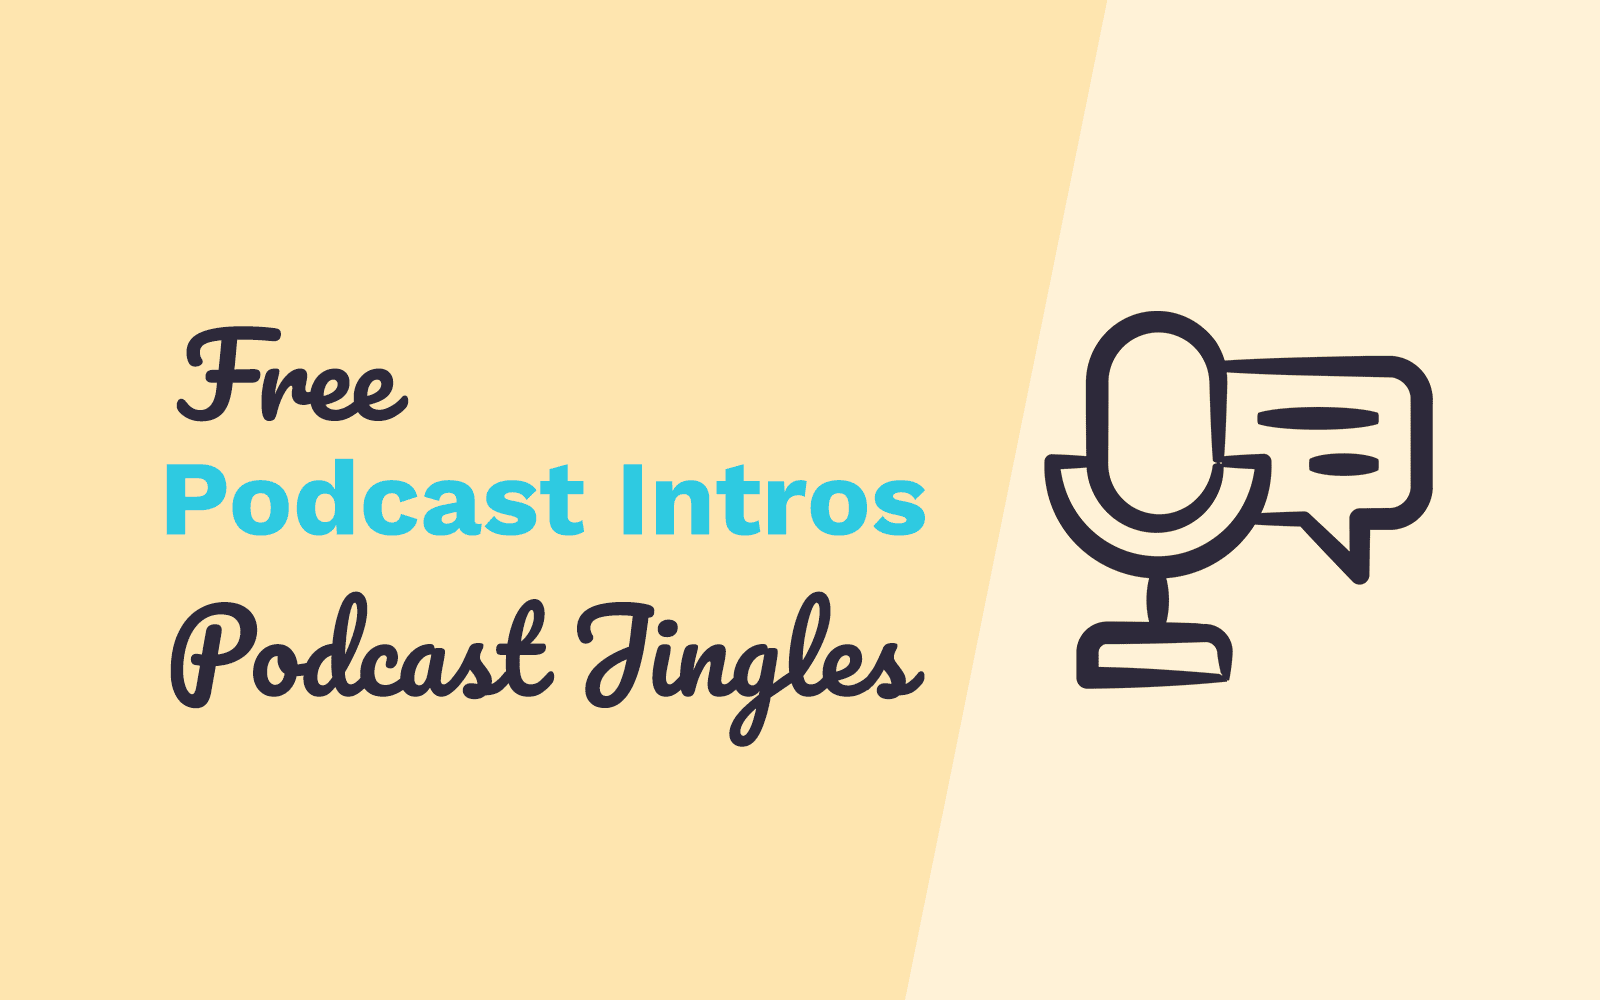 Free Podcast Intros - Download Instantly and Use Royalty Free